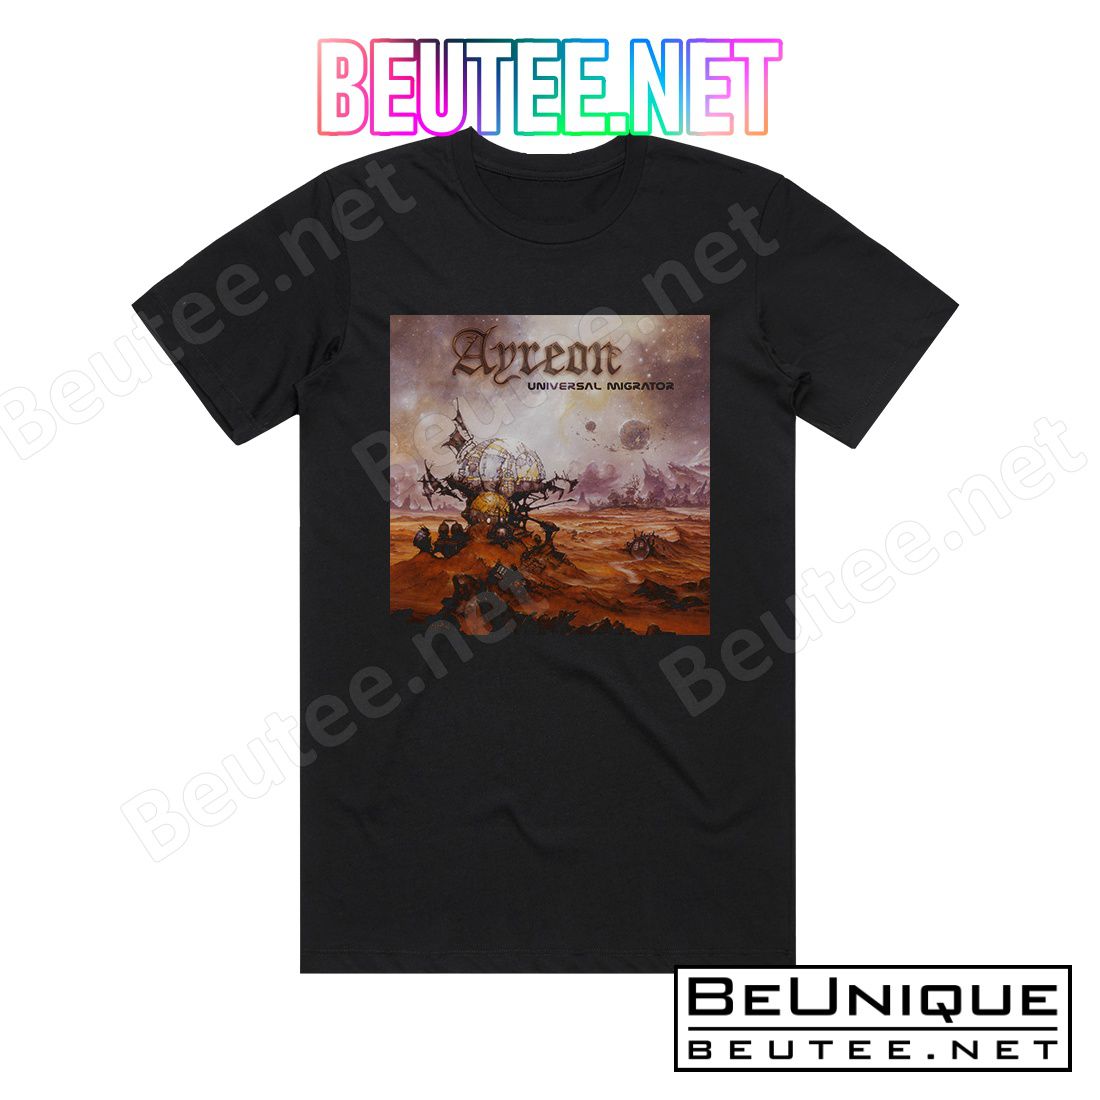 Ayreon Universal Migrator Part 1 The Dream Sequencer Album Cover T-Shirt